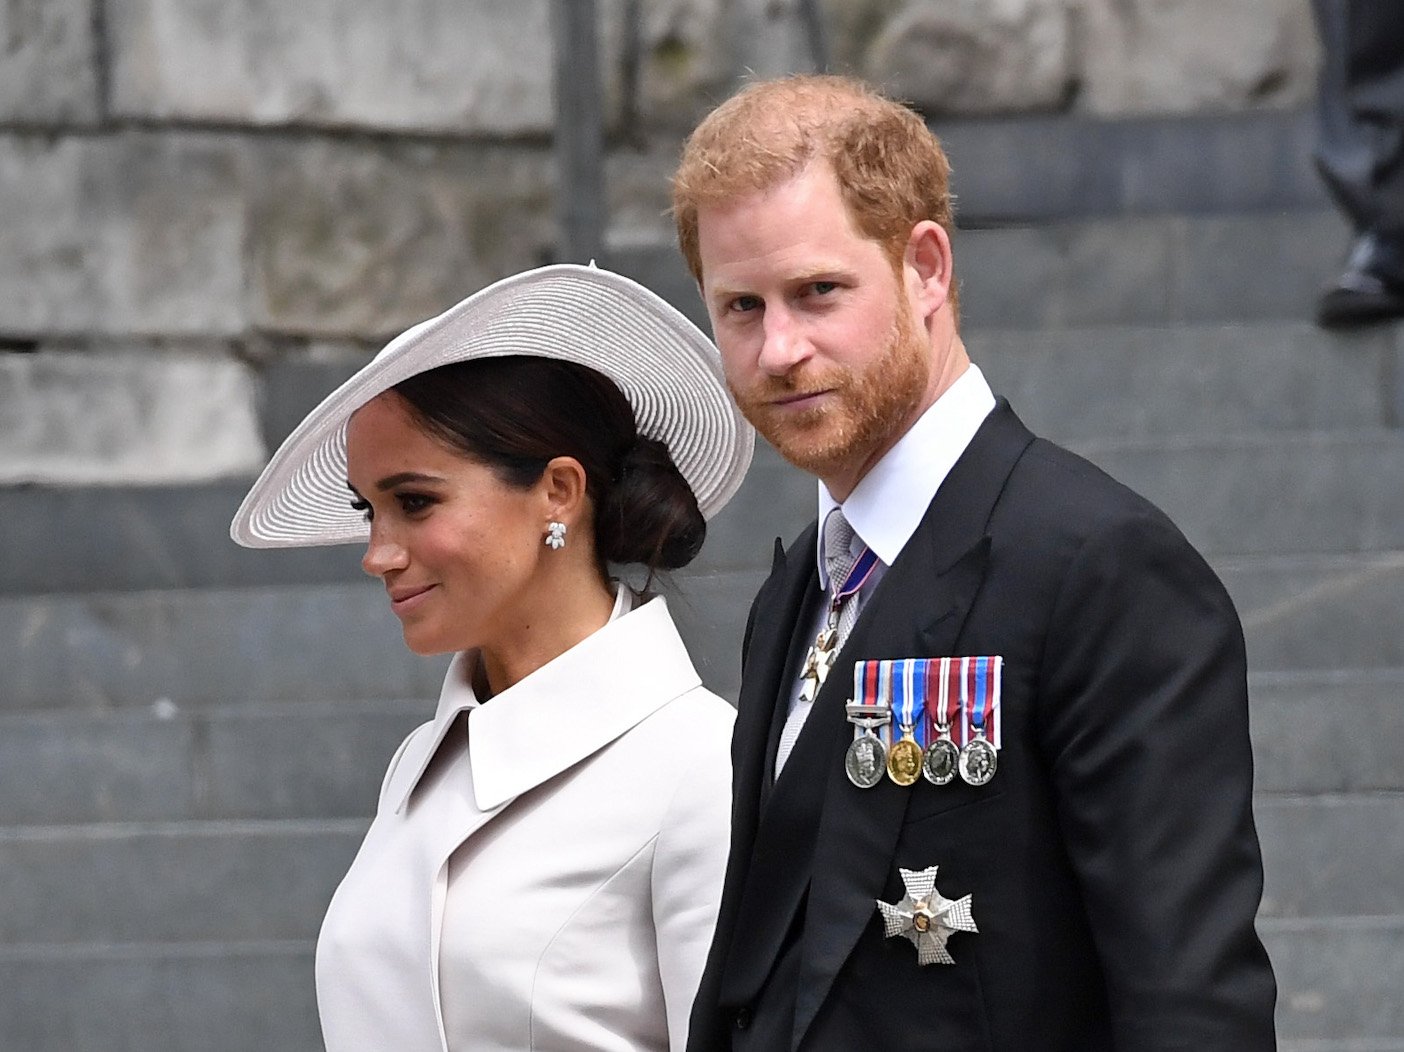 Royal Gossip Claims Prince Harry, Meghan Markle Supposedly ‘Going Broke’ After Allegedly Disastrous UK Visit